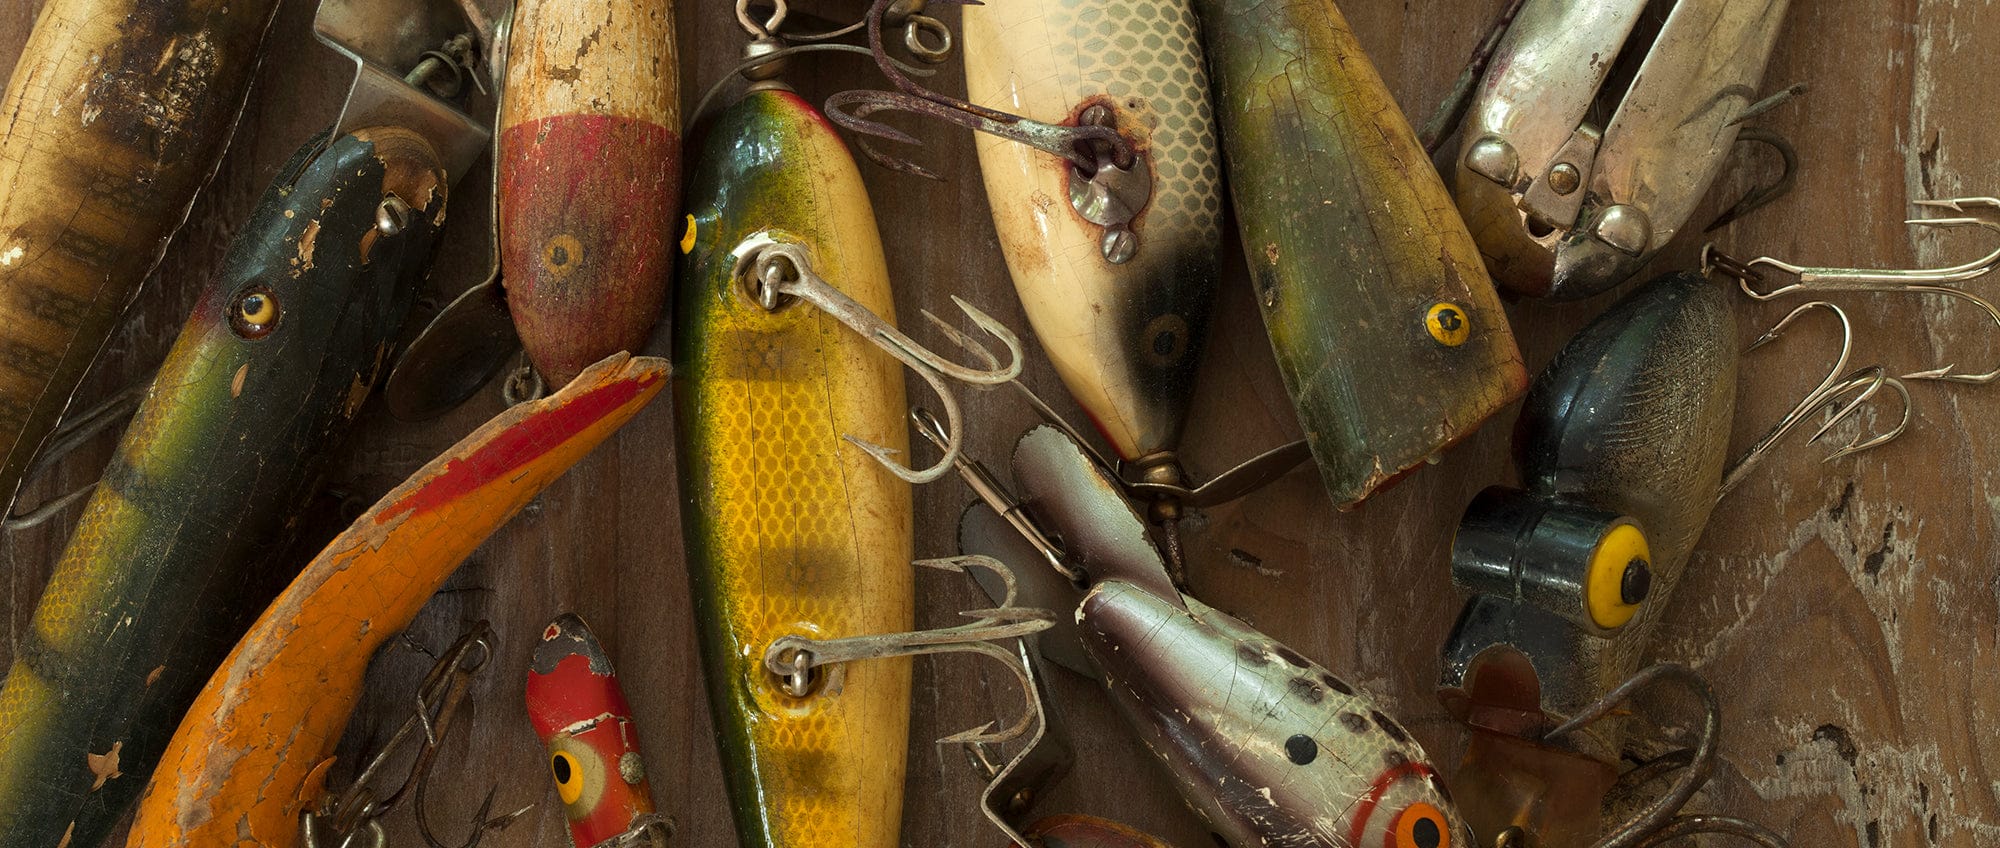 12 vintage fishing lures some made in Japan